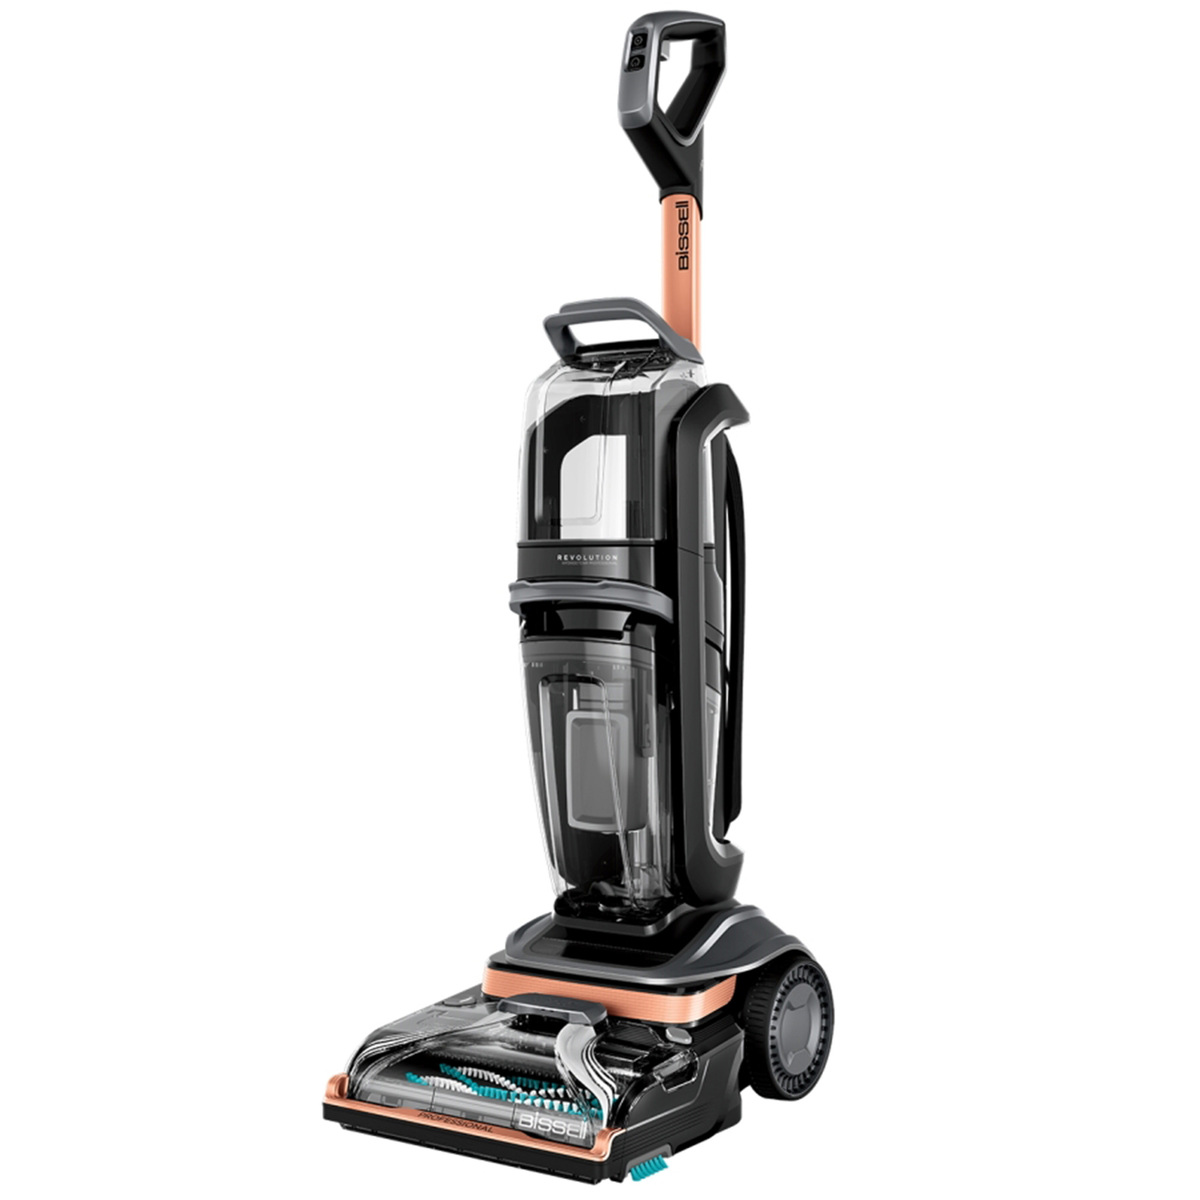 Bissell Spotclean Portable Spot Cleaner 3698E Demonstration & Review 